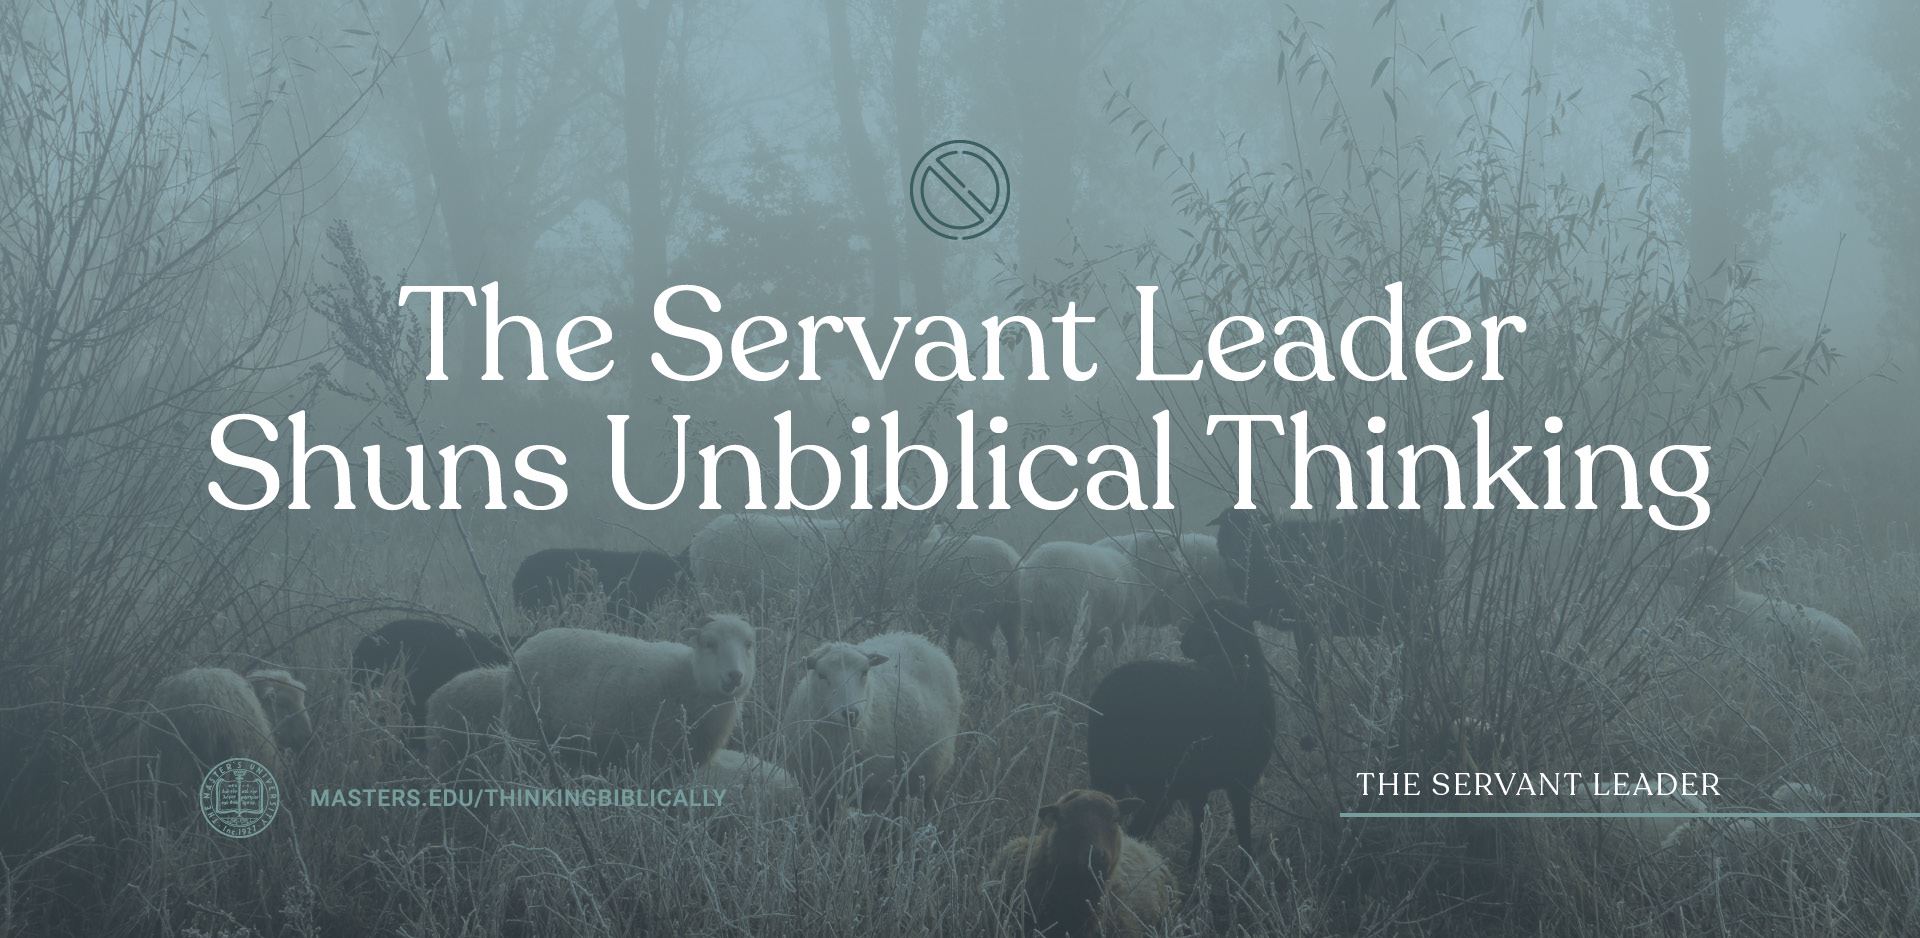 The Servant Leader Shuns Unbiblical Thinking Featured Image